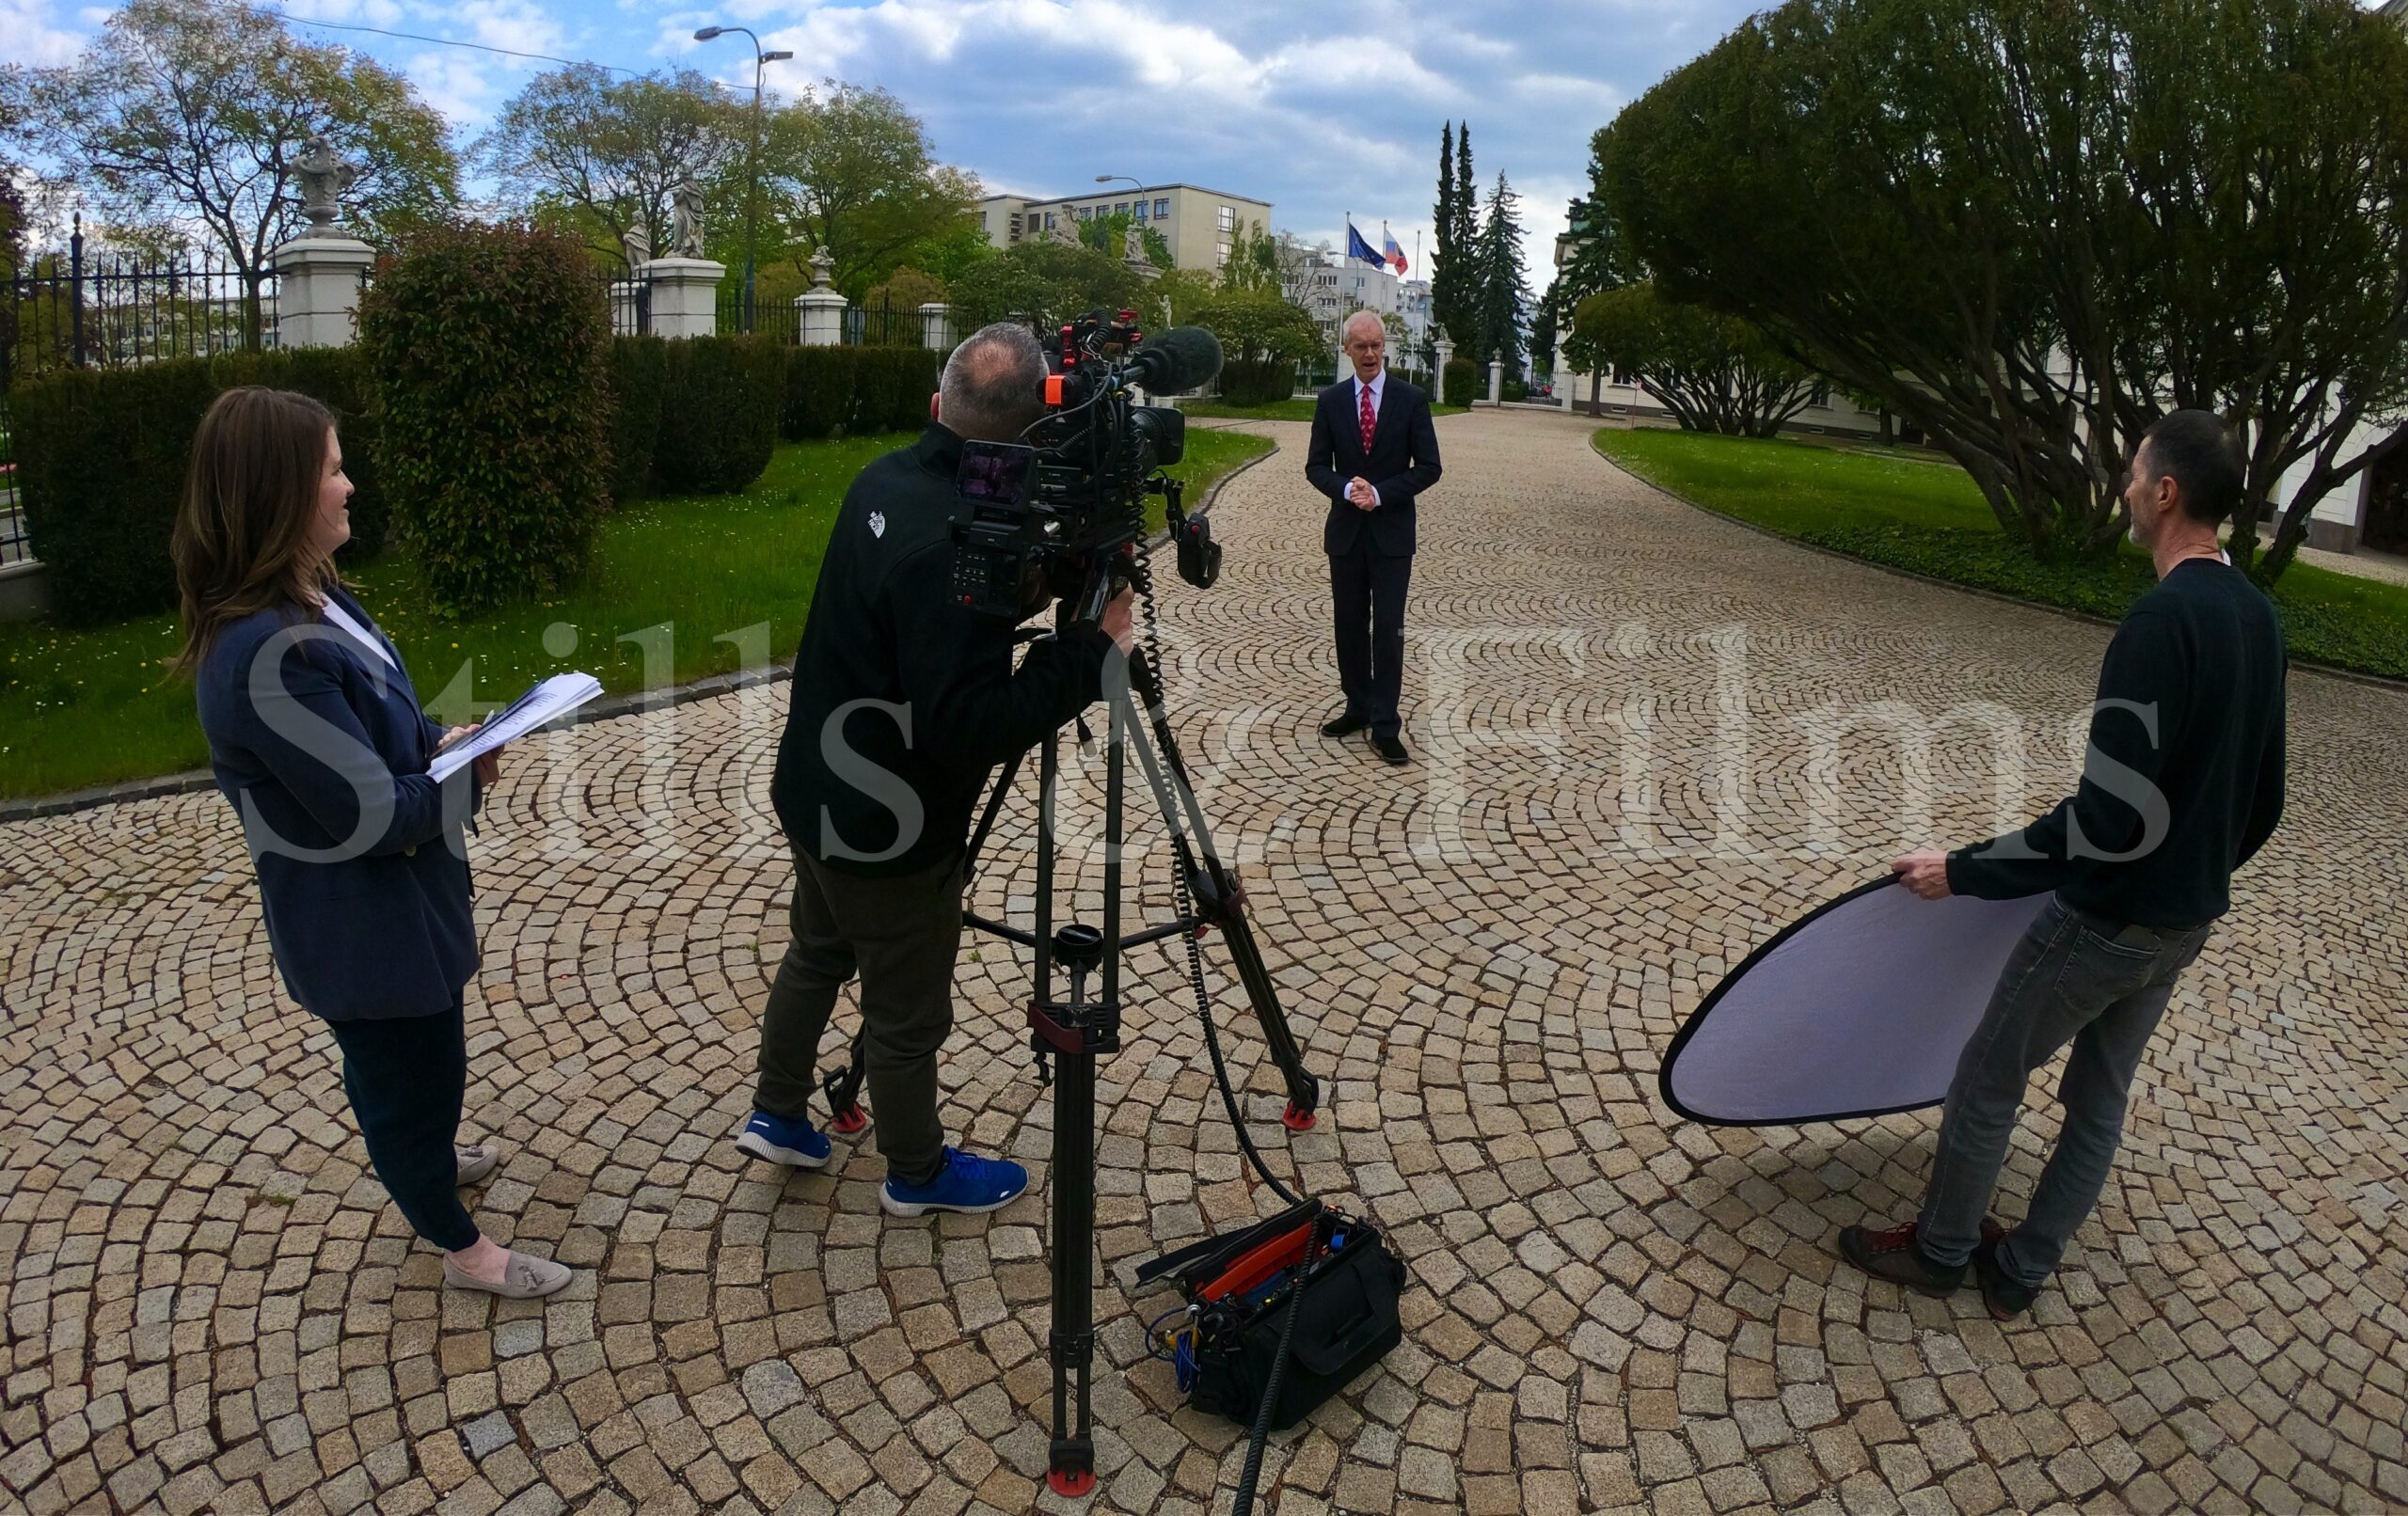 We were filming BBC's Hard Talk at the Presidential Palace in Bratislava with Stephen Sackur.